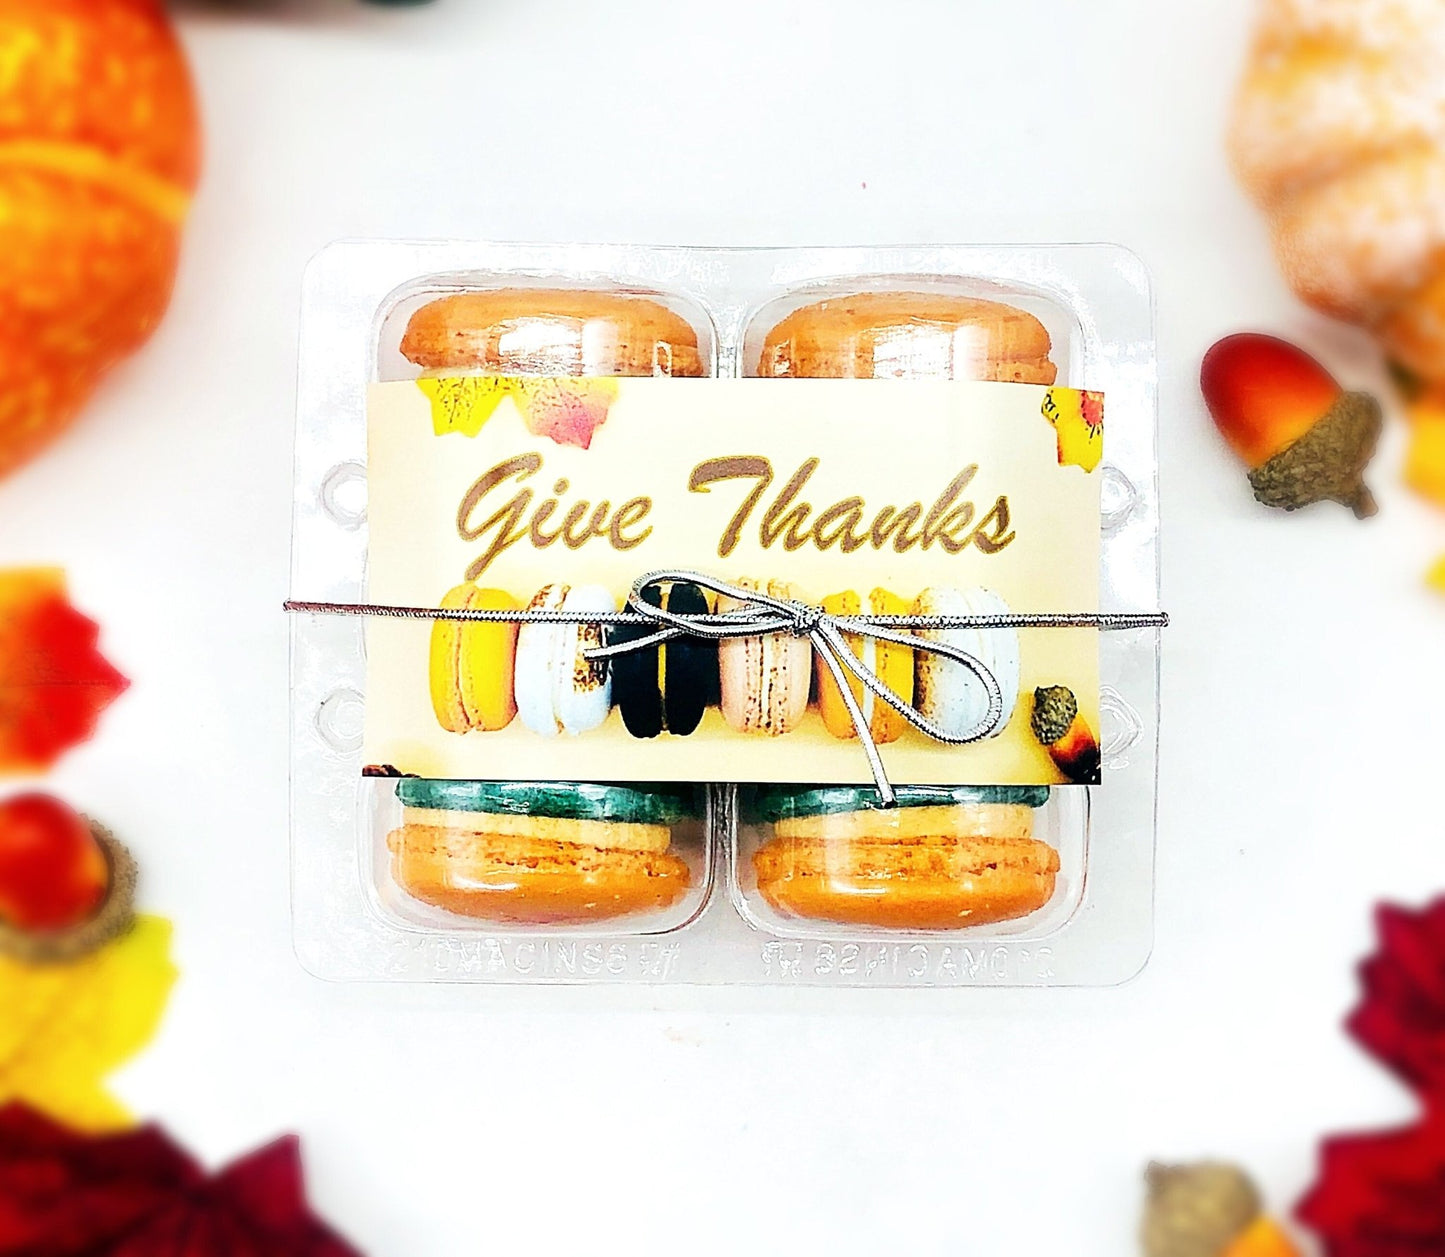 Give Thanks! 6 French Macaron Value Pack | Carrot, Pumpkin Buttercream and Caramel Pecan Cheesecake Macarons - Macaron Centrale